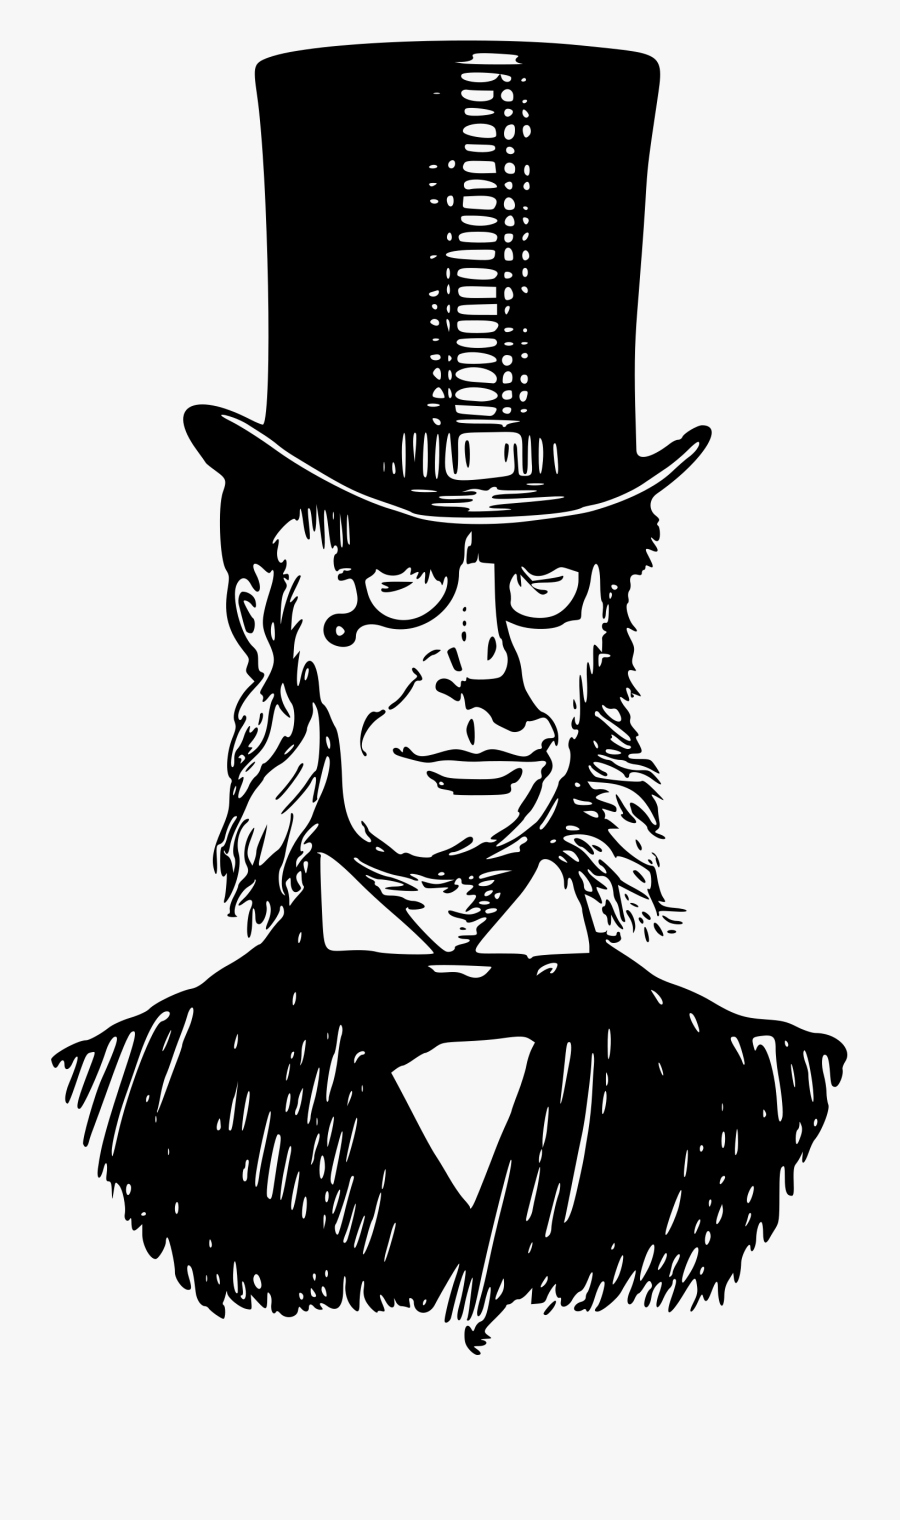 Image Royalty Free Download Clipart Man In Top - Man In Top Hat Clipart, Transparent Clipart